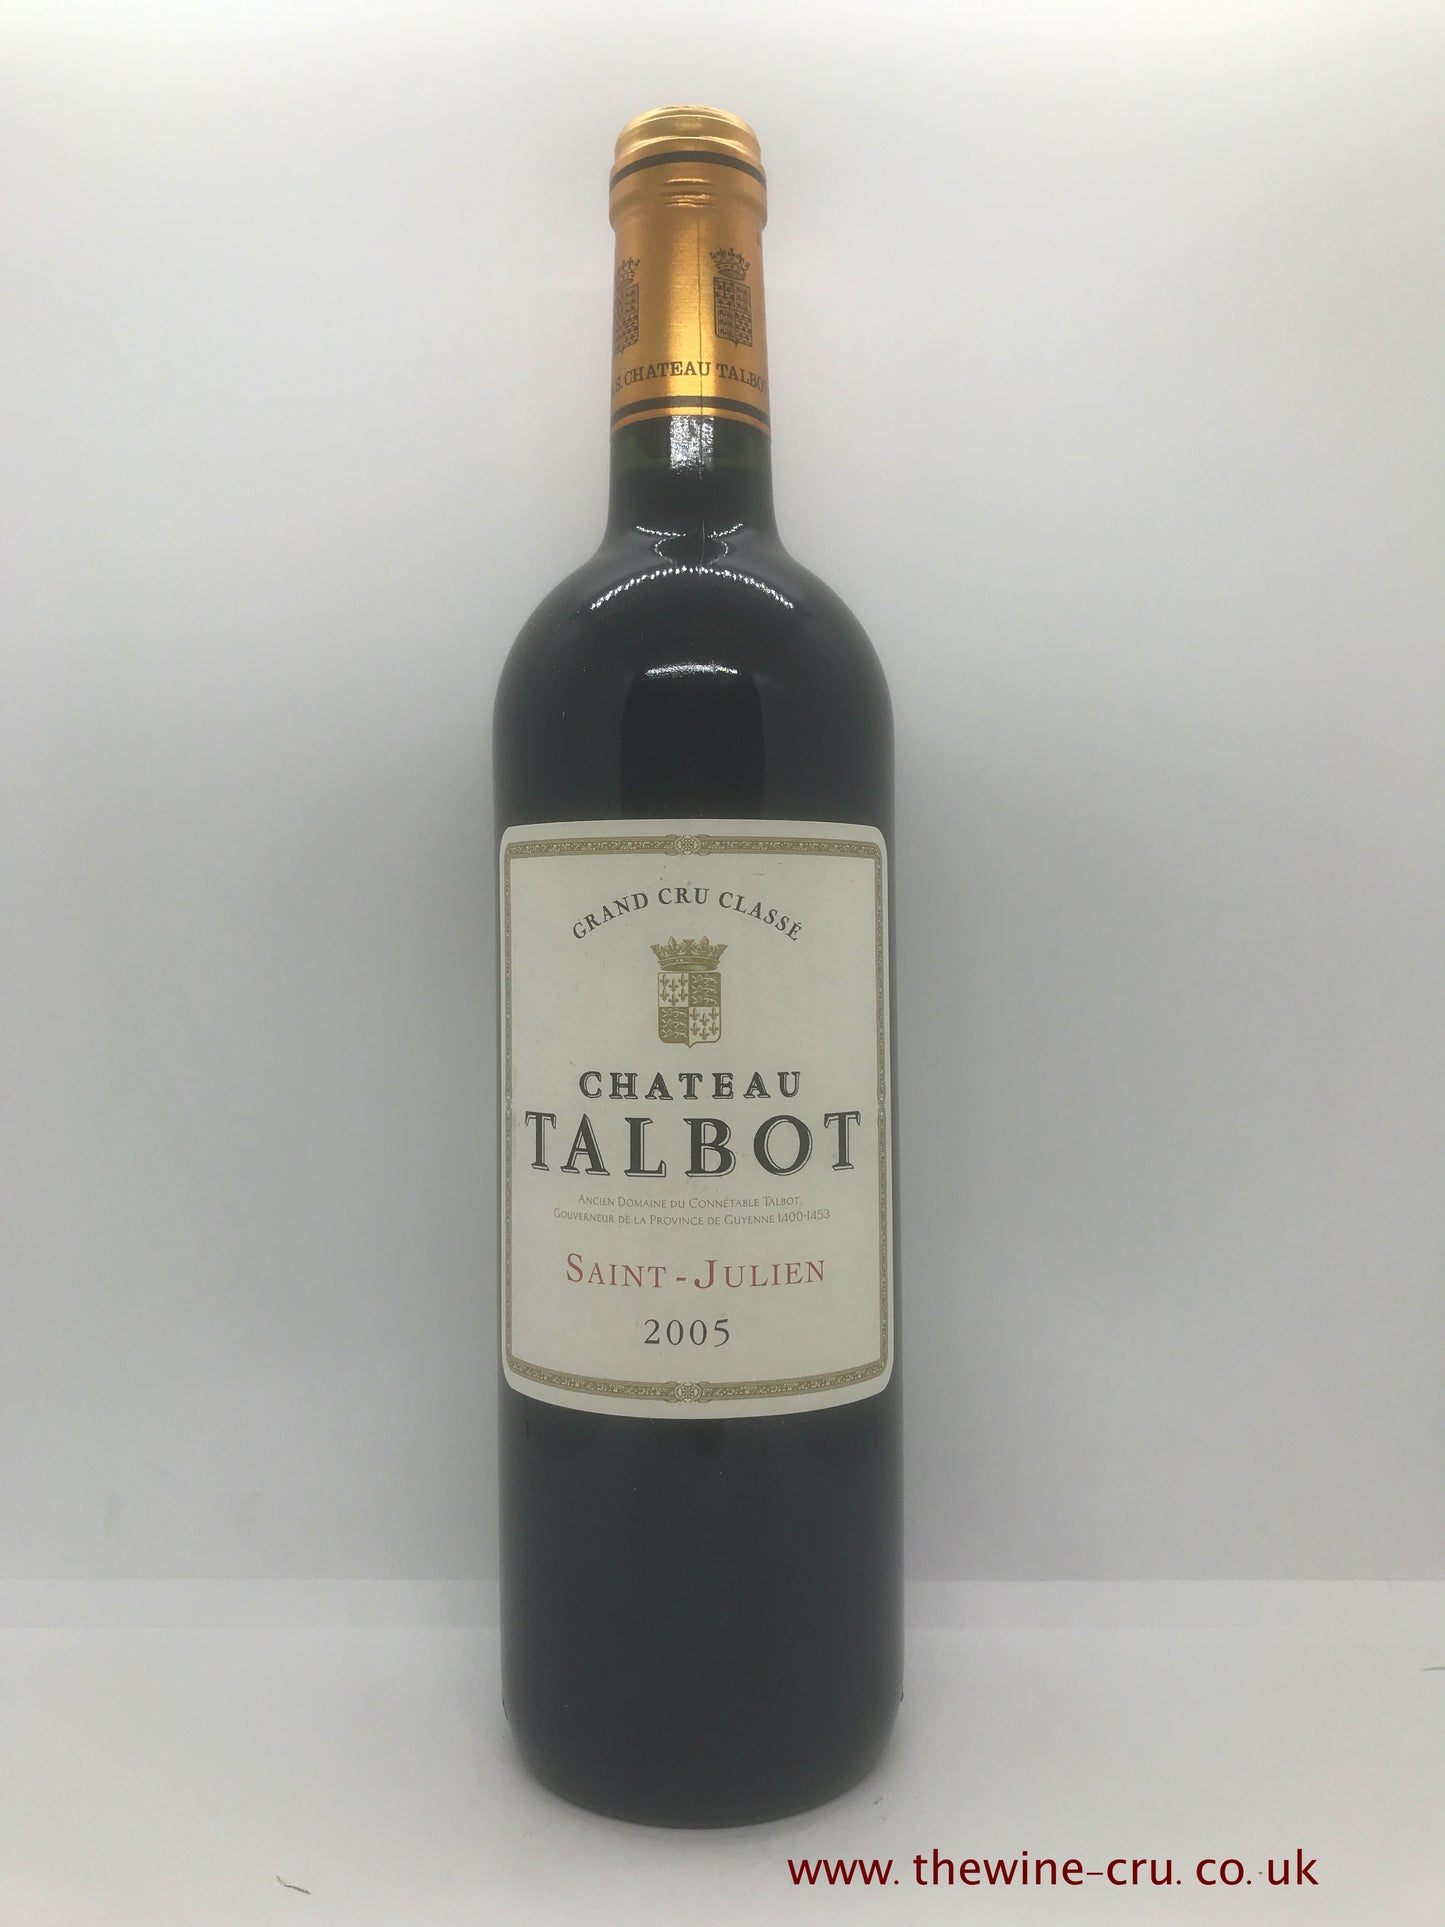 2005 vintage red wine. Chateau Talbot 2005. France, Bordeaux. Immediate delivery. Free local delivery. Gift wrapping available.